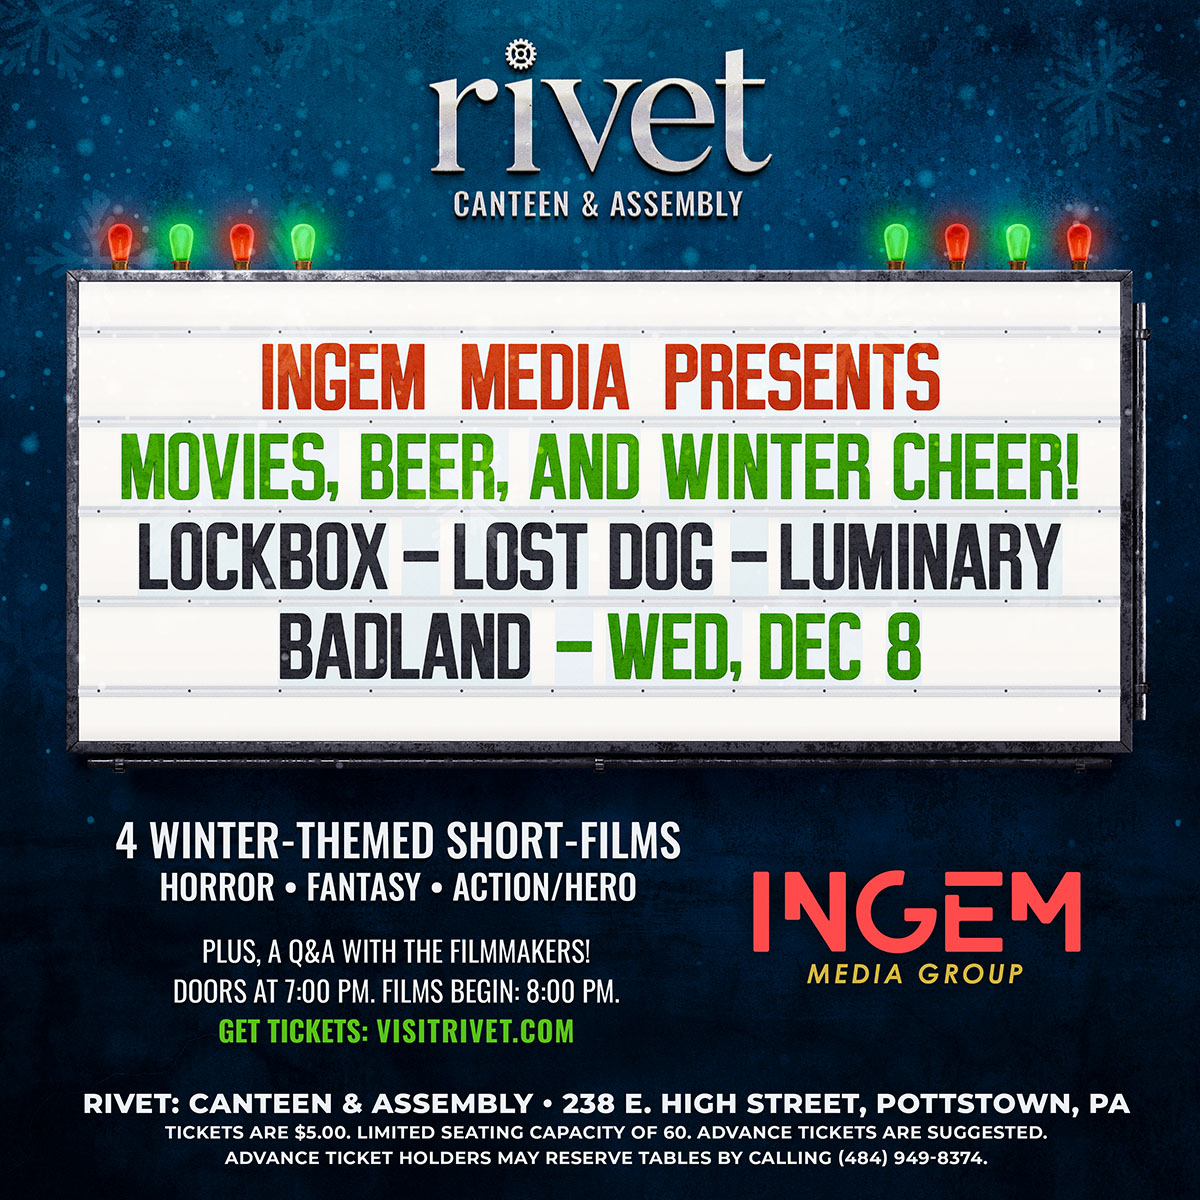 Our Wednesday night film screenings series is back! Ingem Media Presents... Movies, Beer, and Winter Cheer! Doors open at 7:00 PM. The films begin at 8:00 PM. The event will be completely over by 10:00 PM.